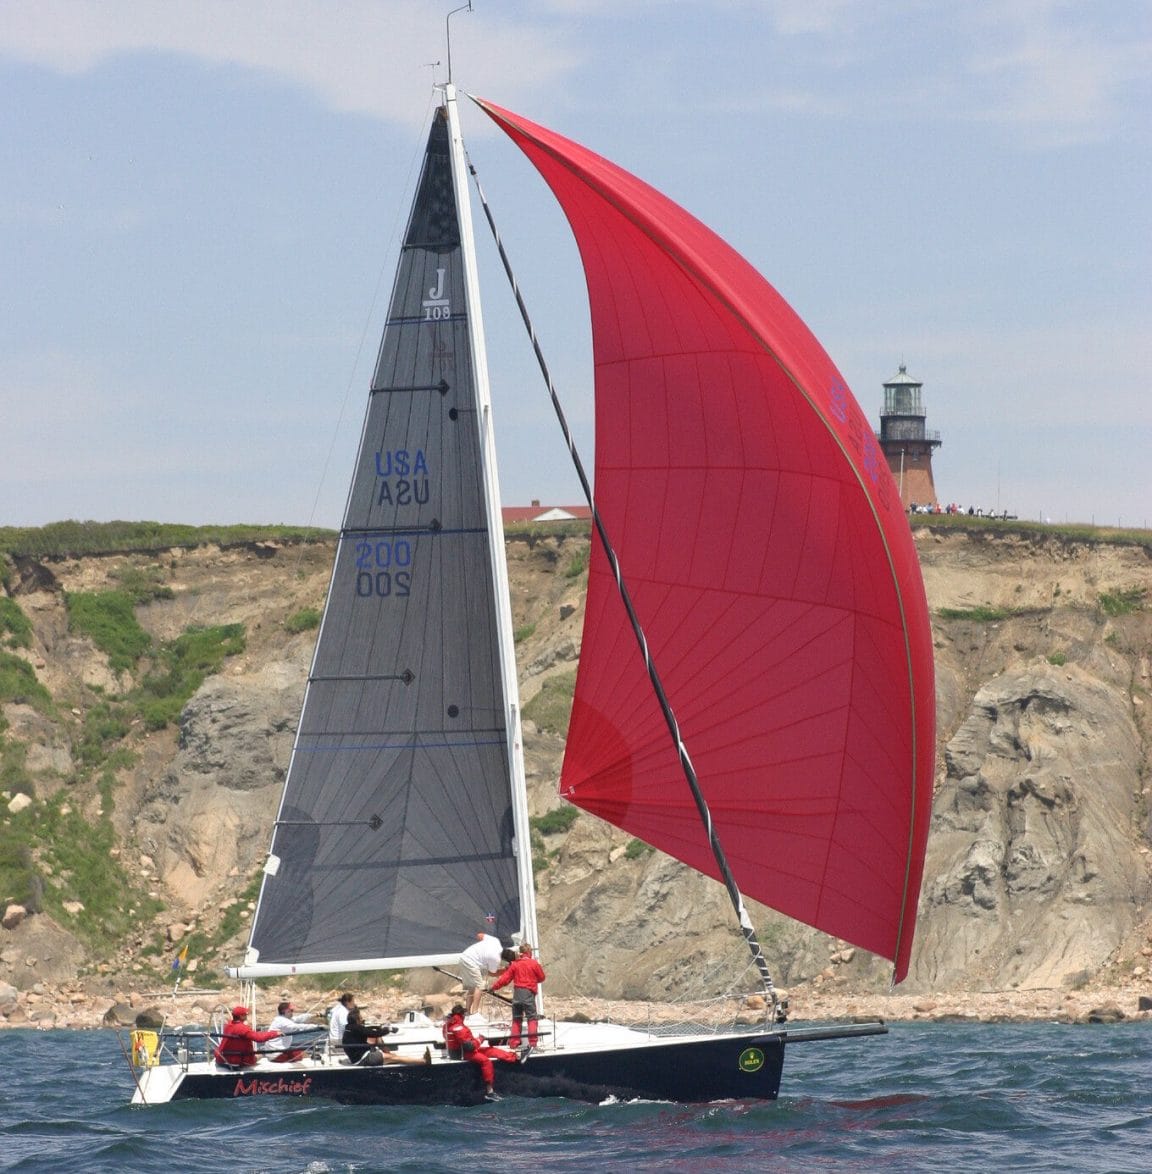 Take the stress out of sailing shorthanded: handling sails